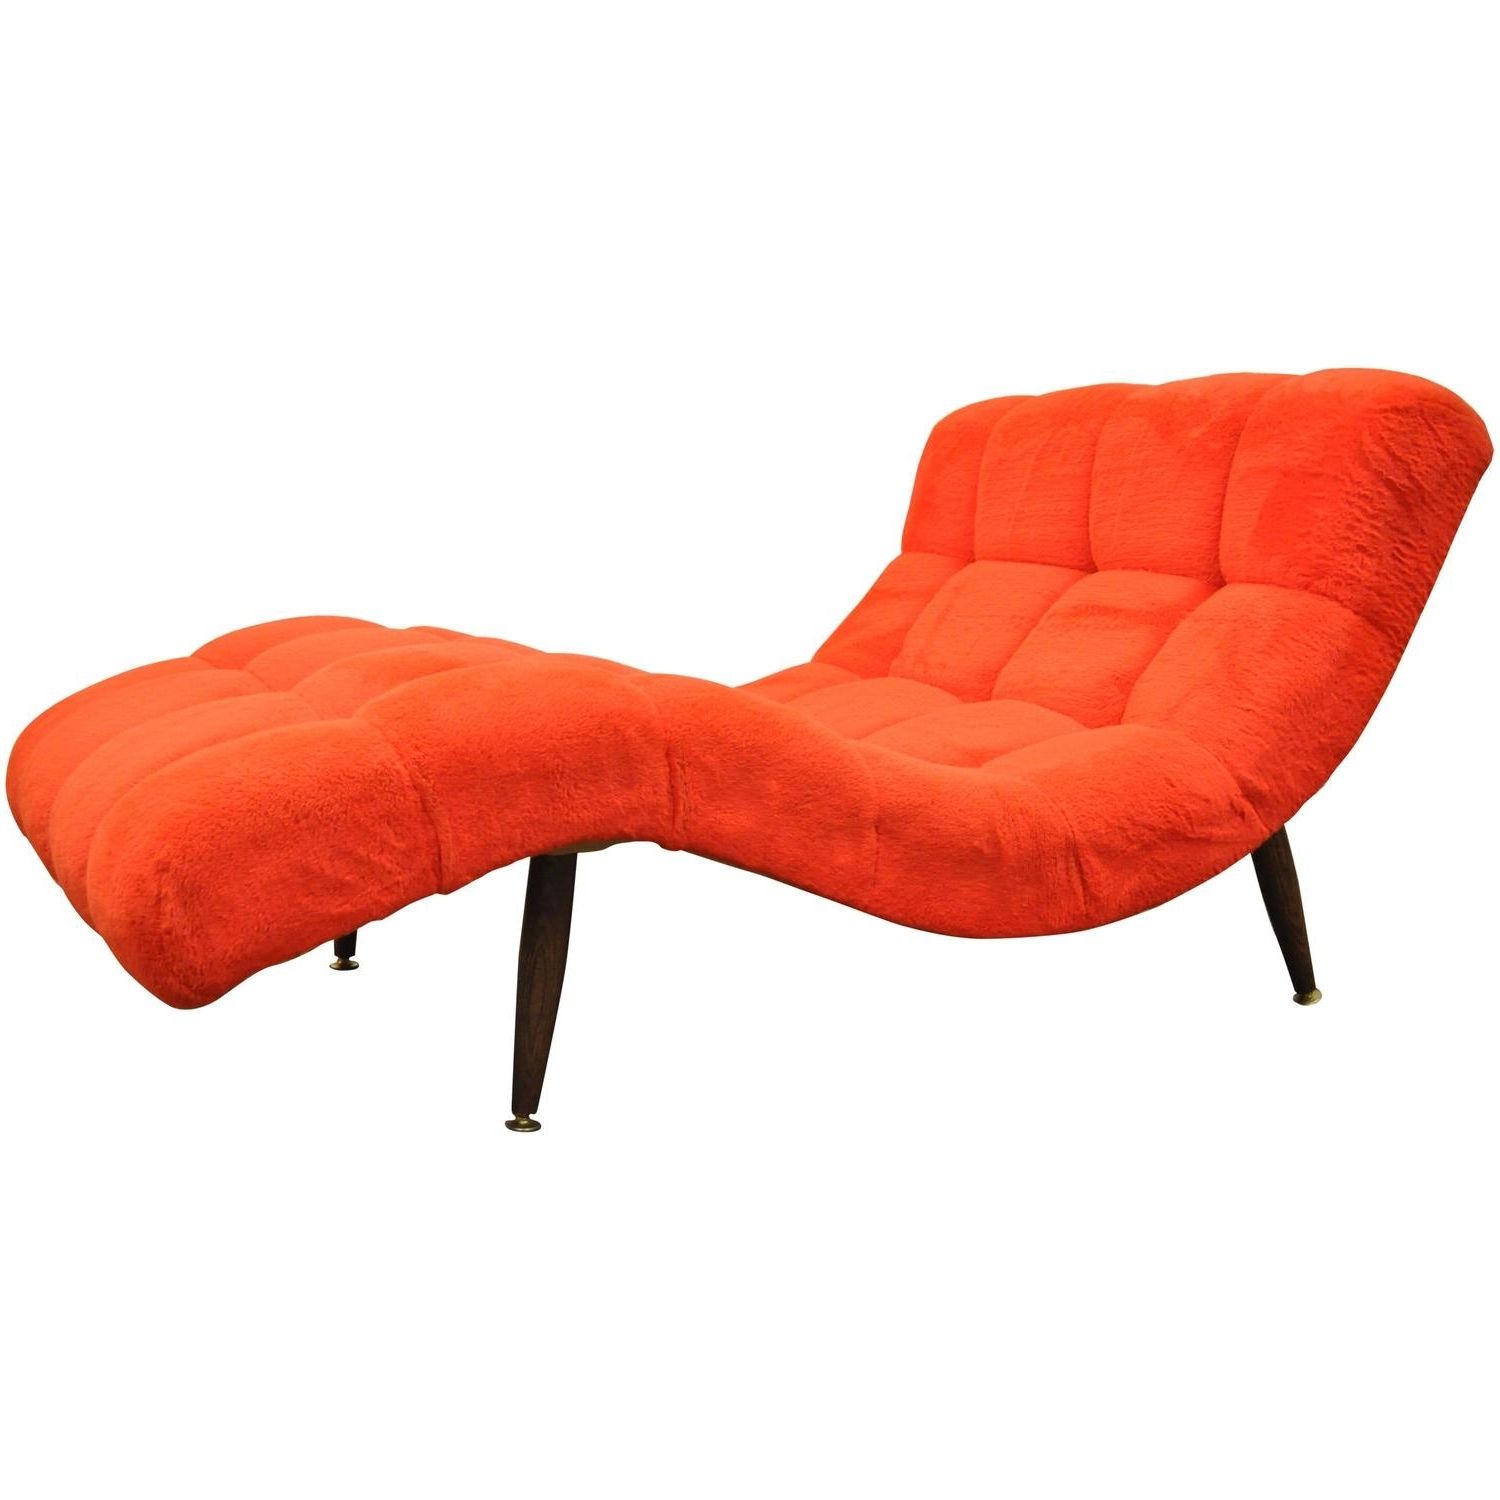 Vintage Mid Century Modern Double Wide Wave Chaise Lounge For Sale With Regard To Newest Orange Chaise Lounges (Photo 2 of 15)